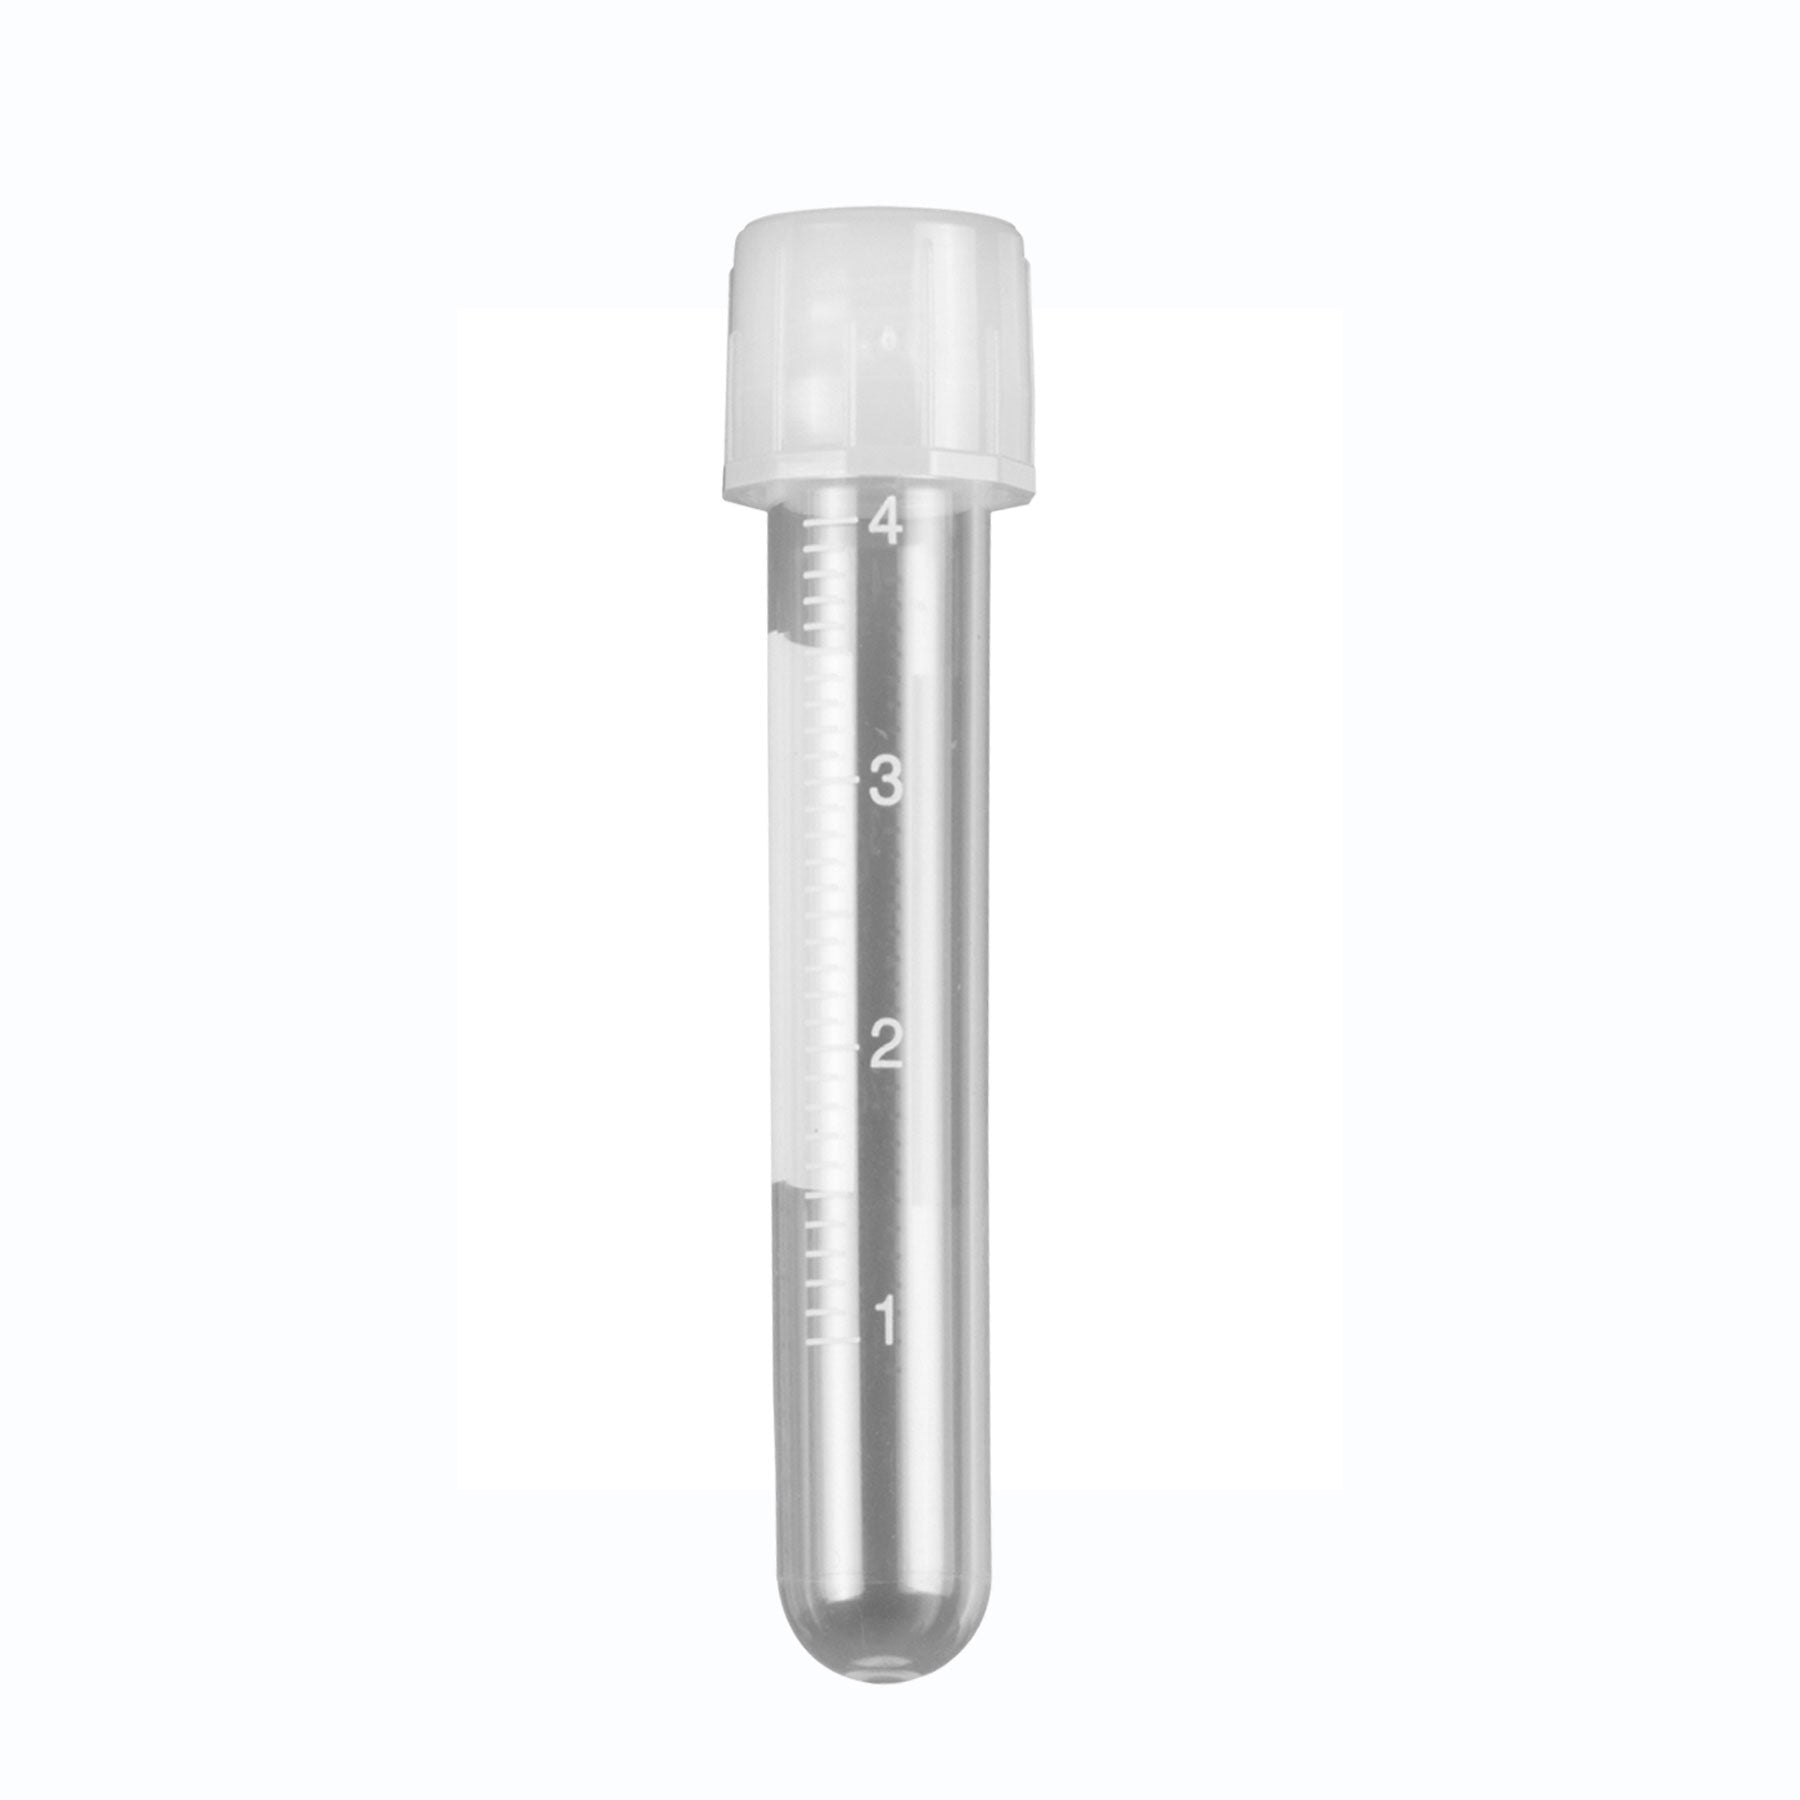 MTC Bio T8730, DuoClick Culture Tube, 5ml, 12 X 75Mm, PP, with Attached 2-Position Screw-Cap, Printed Graduations, Sterile, 20 Bags Of 25 Tubes, 500/Case